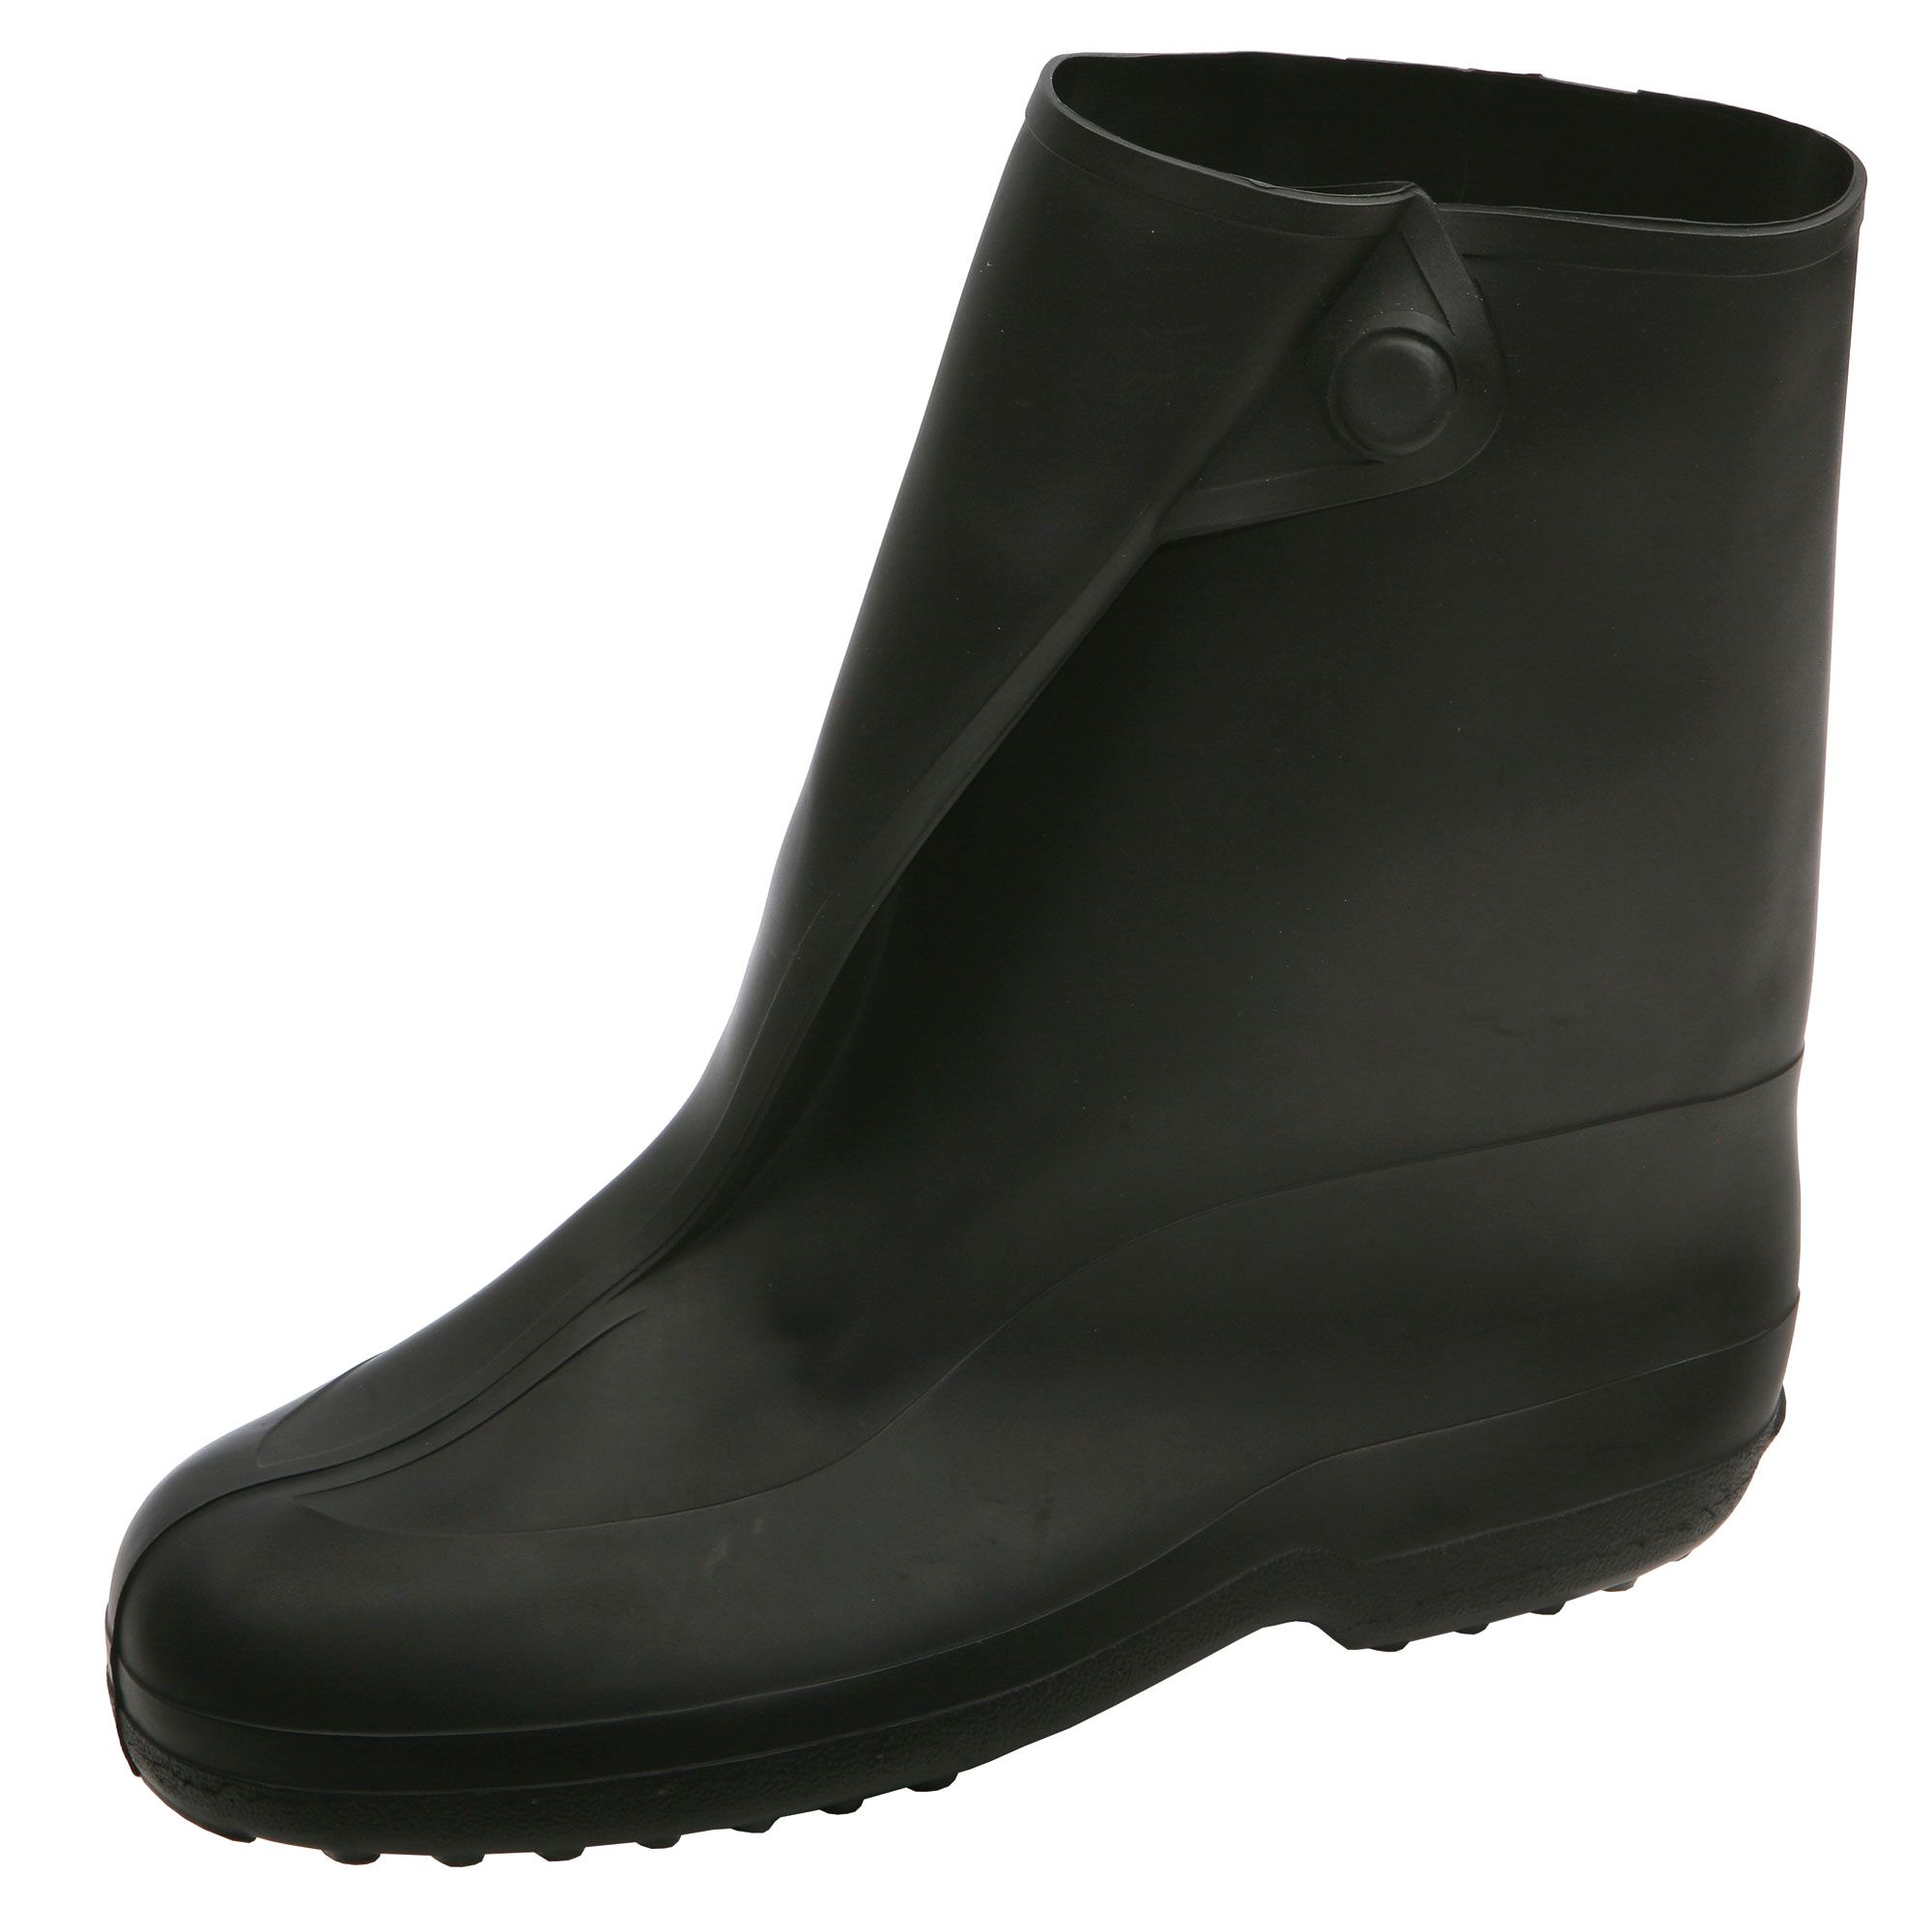 Tingley 1400 Boot Shoe Rubber Overshoes Galoshes Waterproof Rain Snow ALL SIZES 